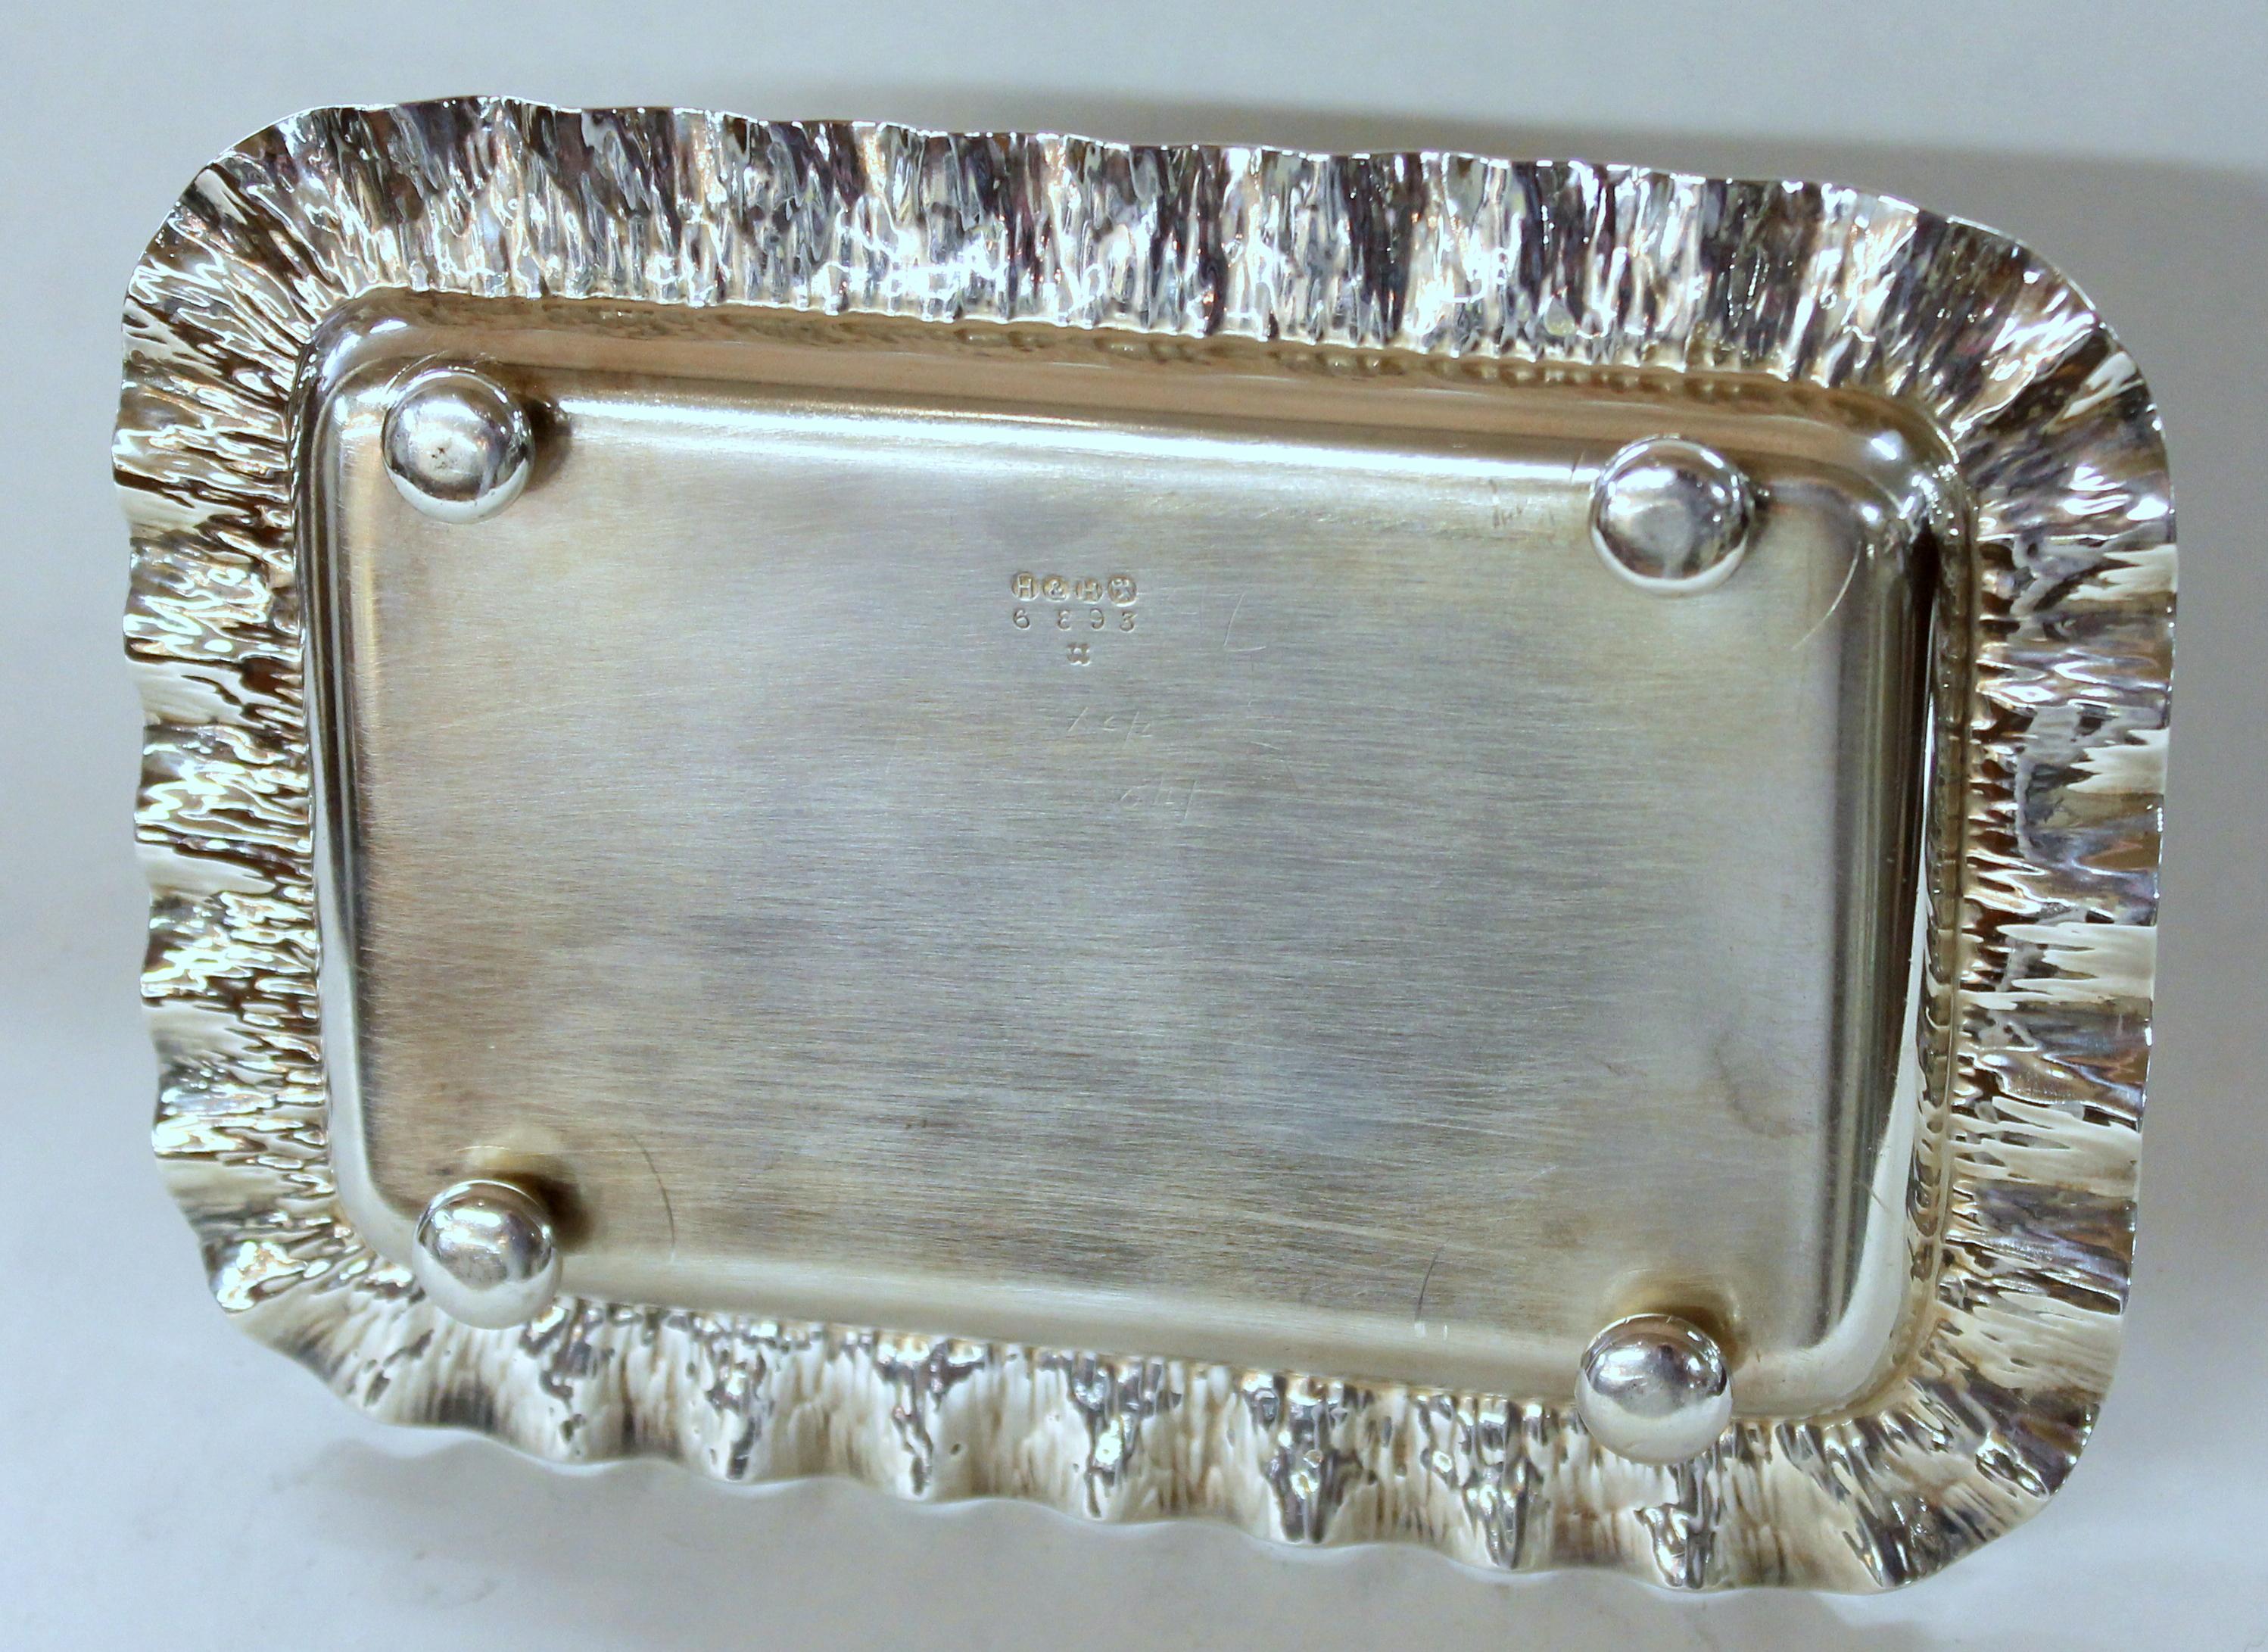 English Hukin & Heath Aesthetic Movement Silver Plate Toast or Letter Rack 1